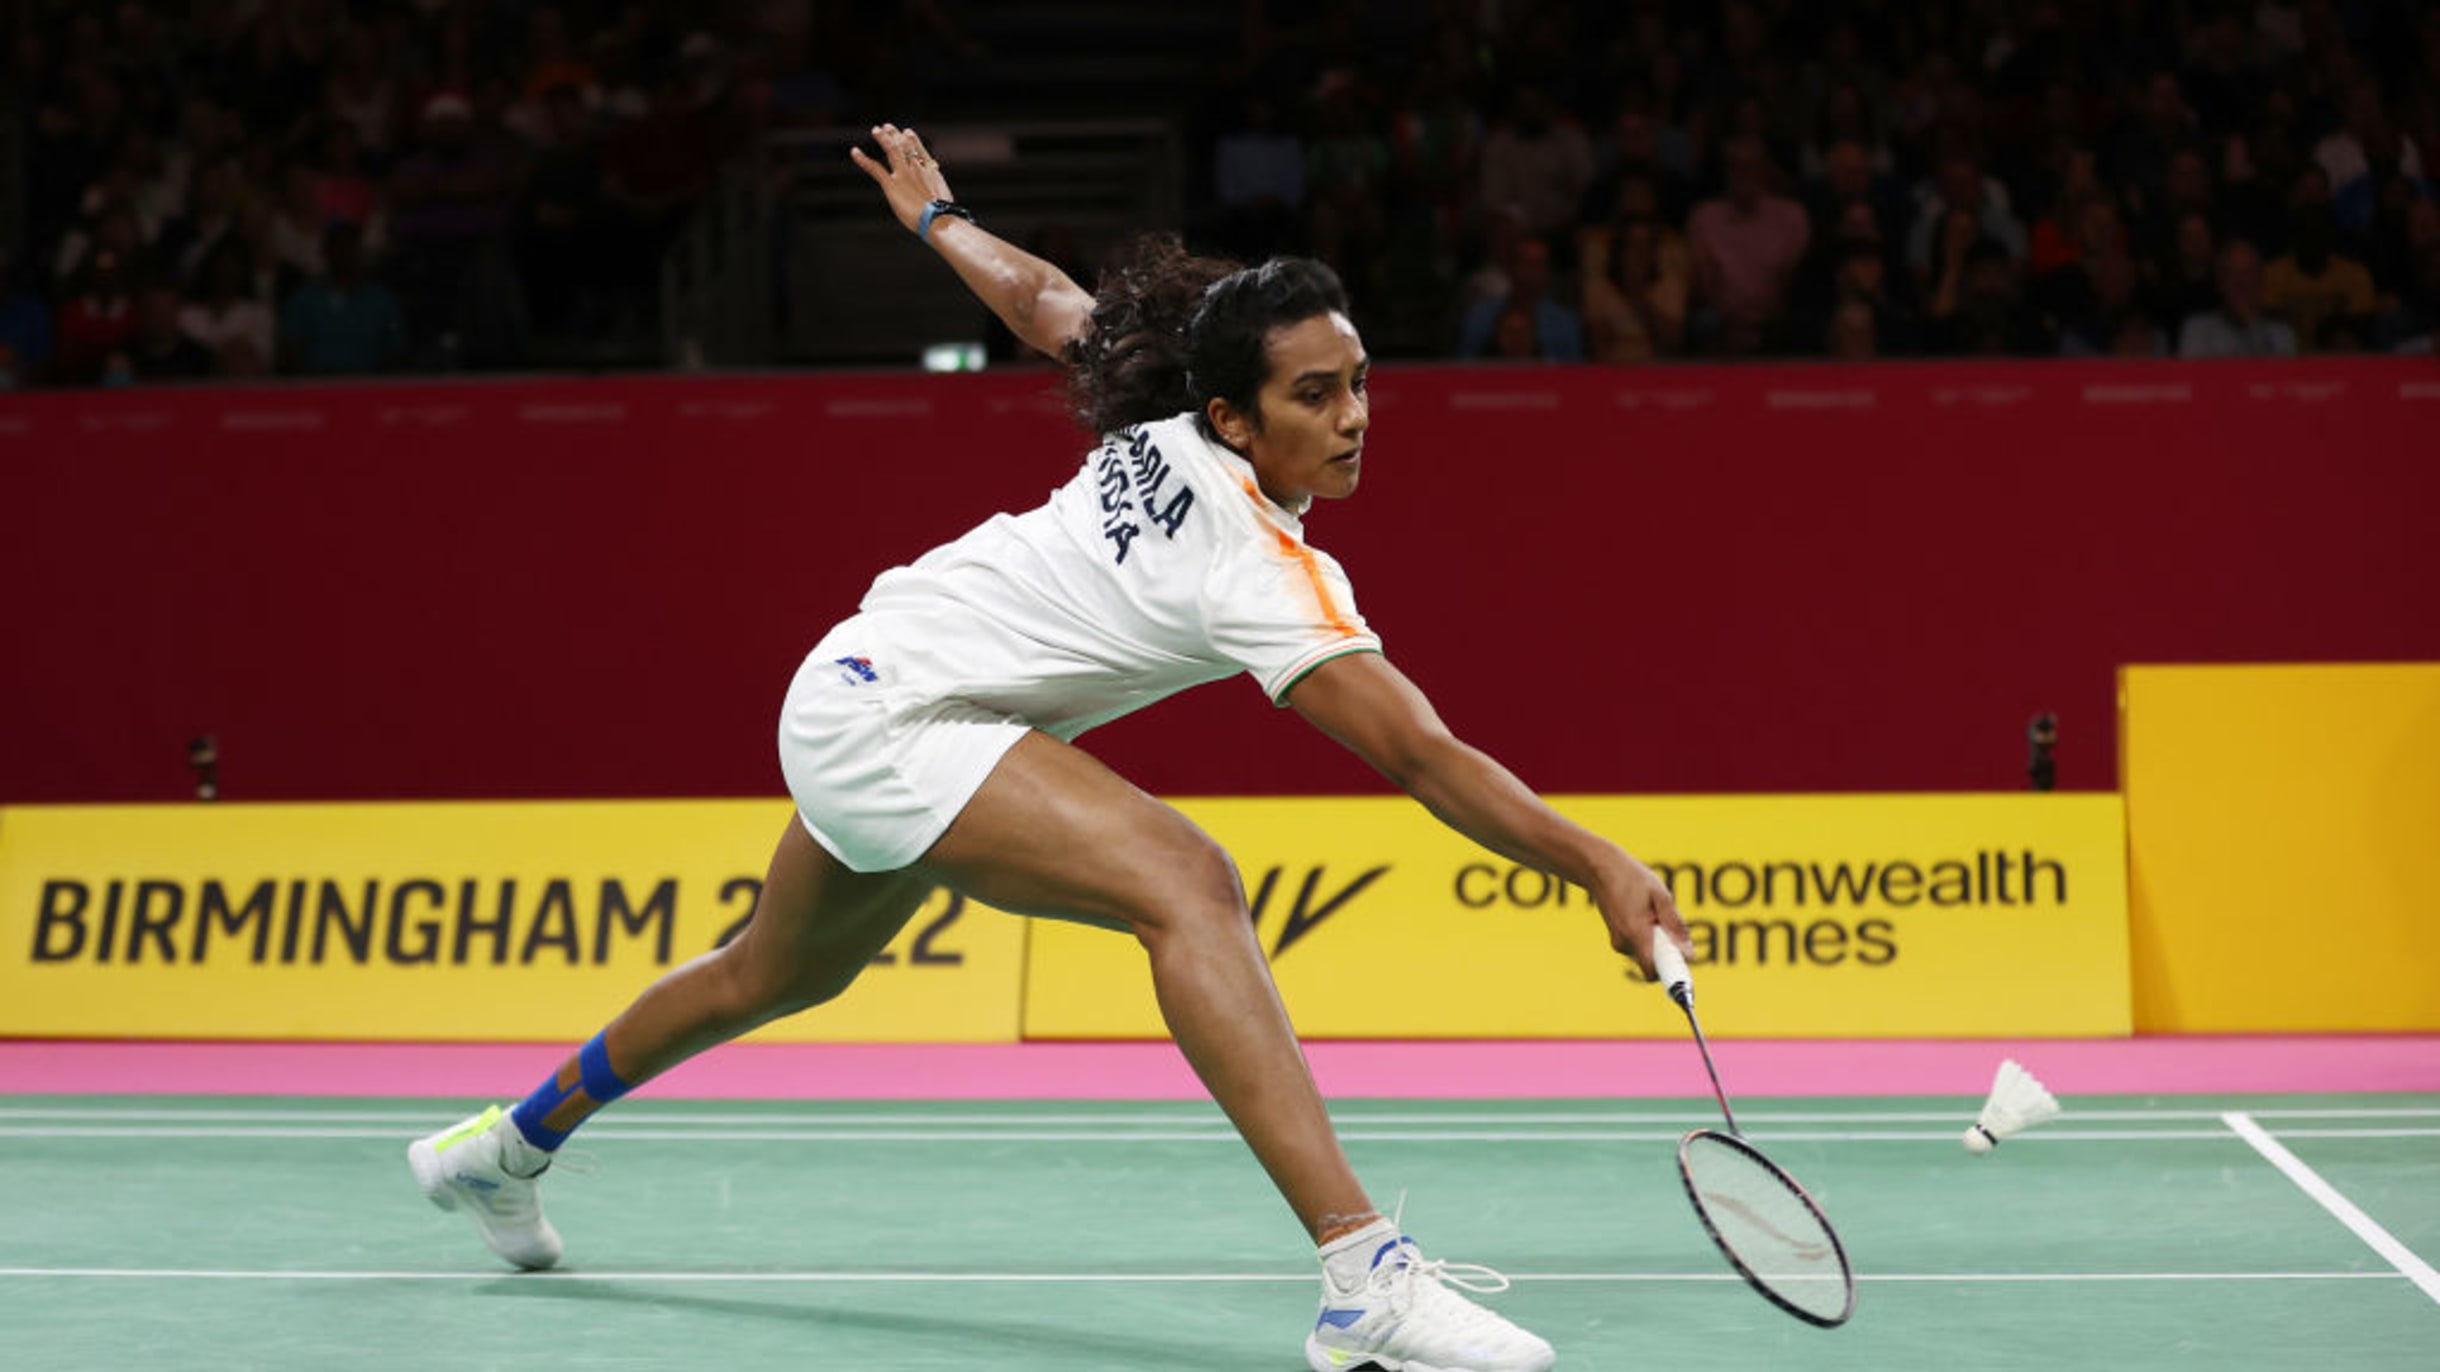 Sudirman Cup 2023 badminton Get schedule and watch live streaming and telecast in India